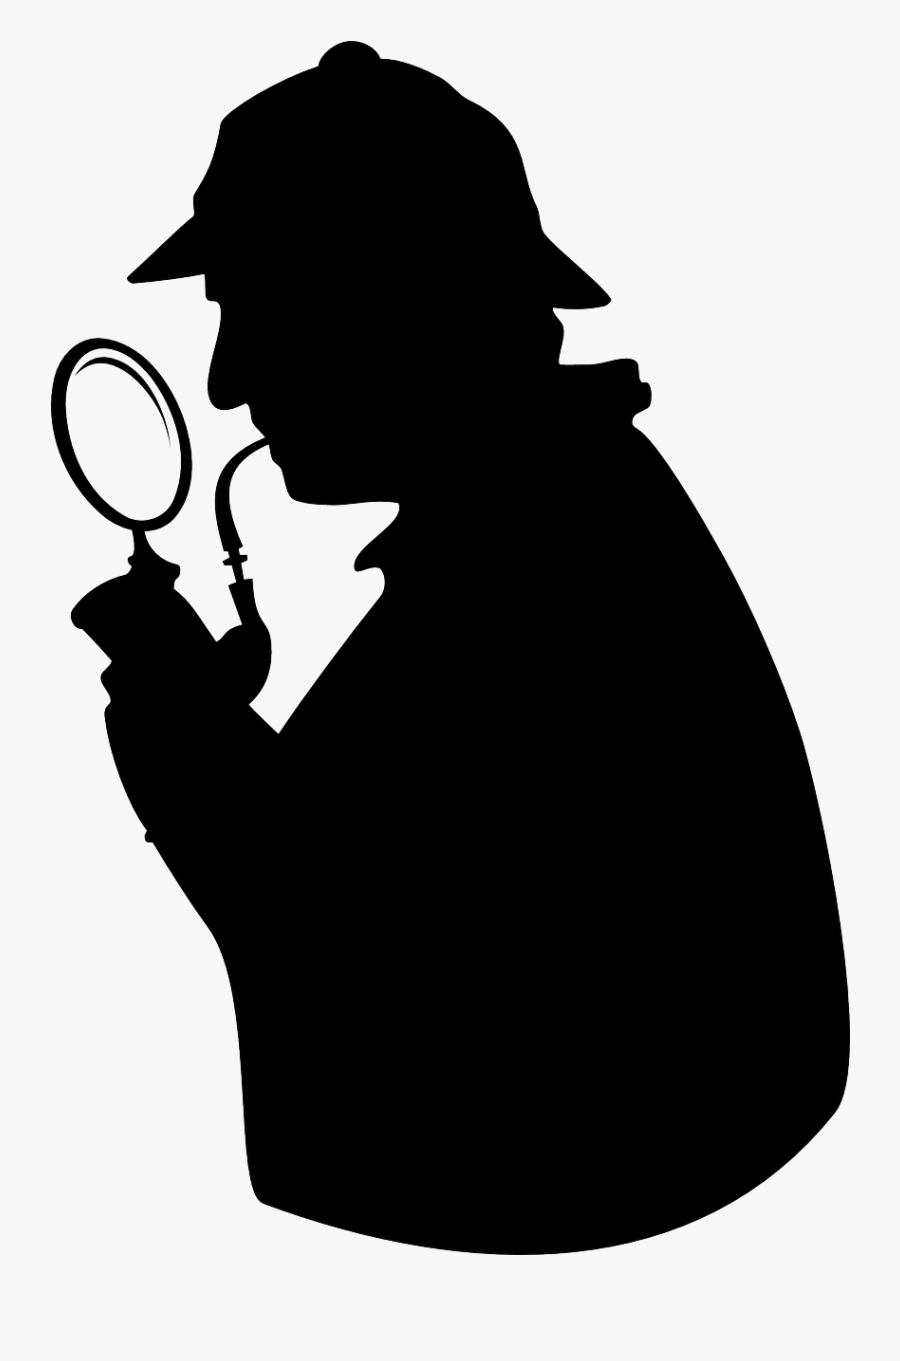 Detective With Magnifying Glass Clipart - Magnifying Glass Sherlock Holmes Silhouette, Transparent Clipart